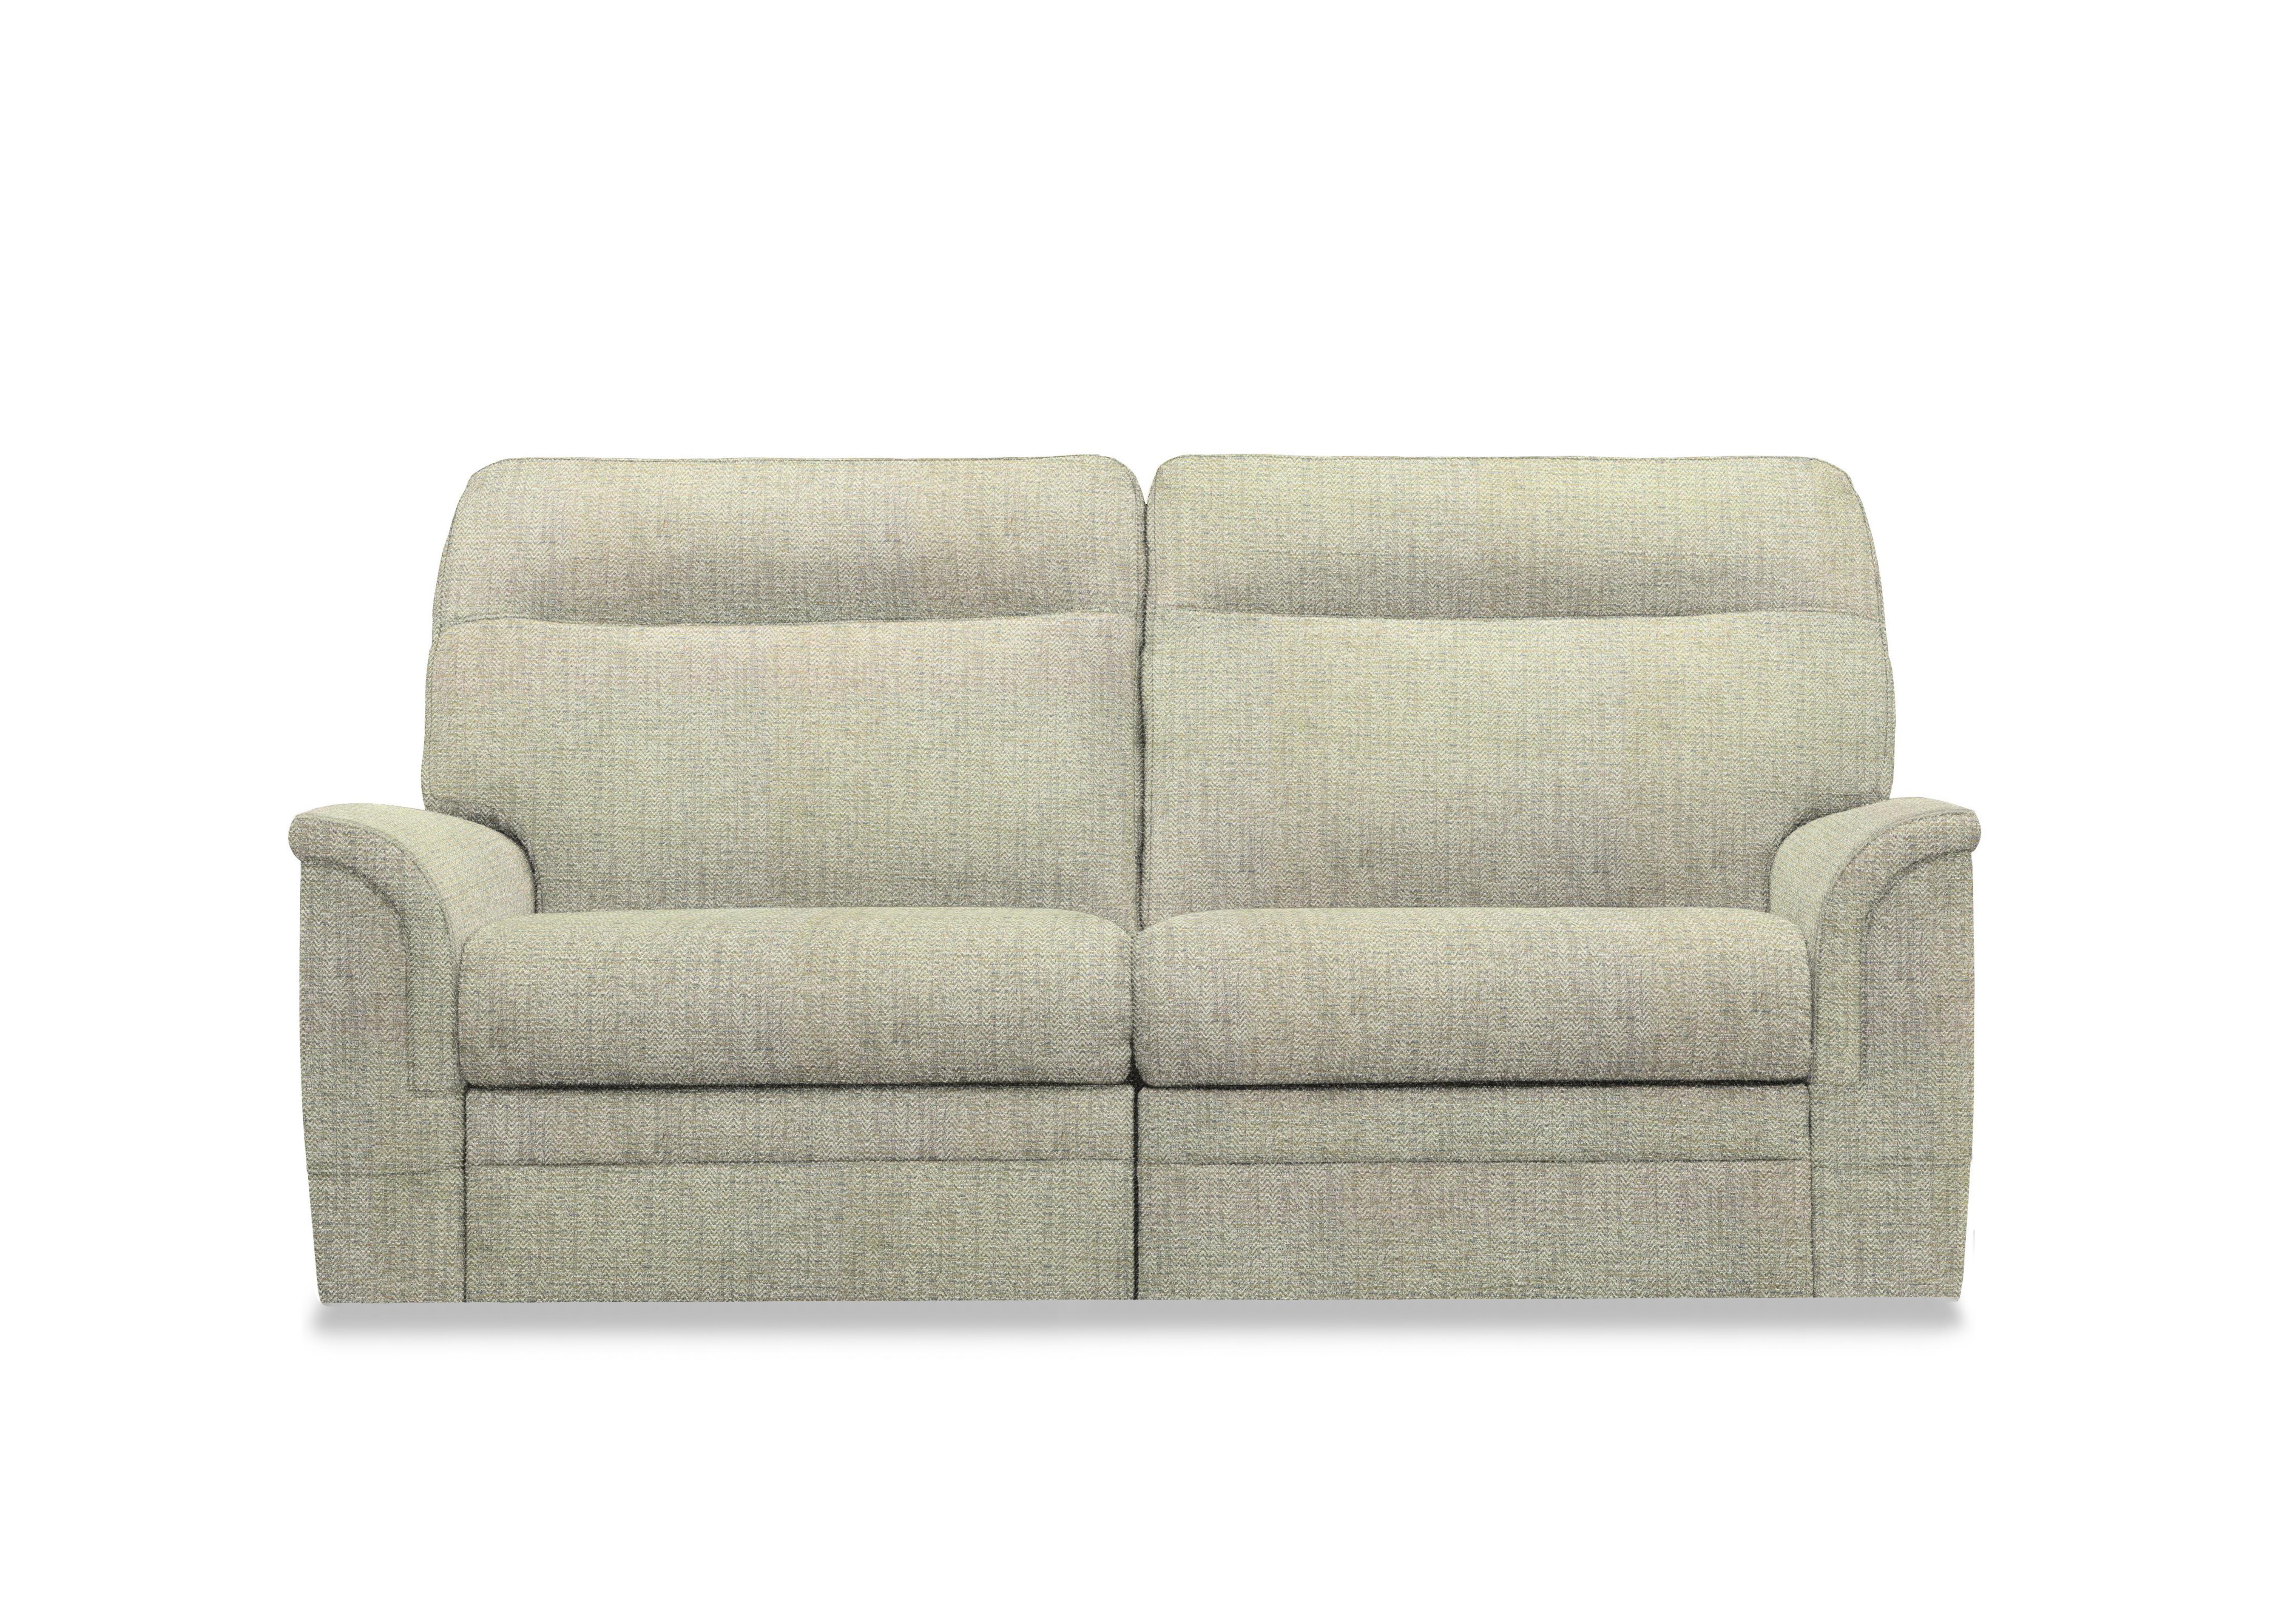 Hudson 23 Large 2 Seater Fabric Sofa in Cromwell Mint 001355-0069 on Furniture Village